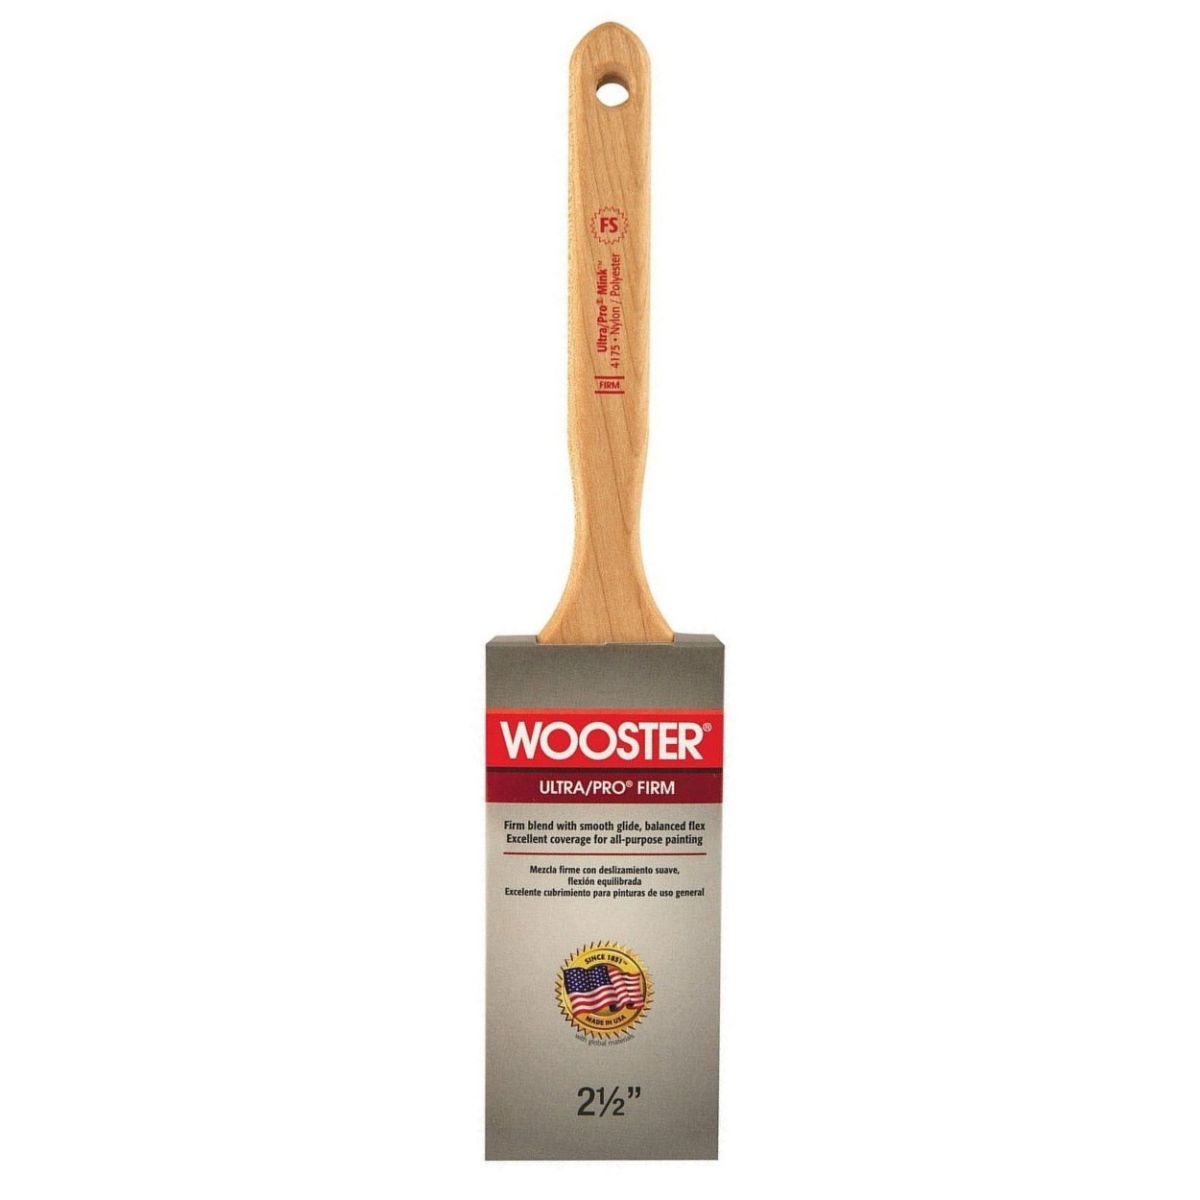 Wooster Mink Firm Paint Brush